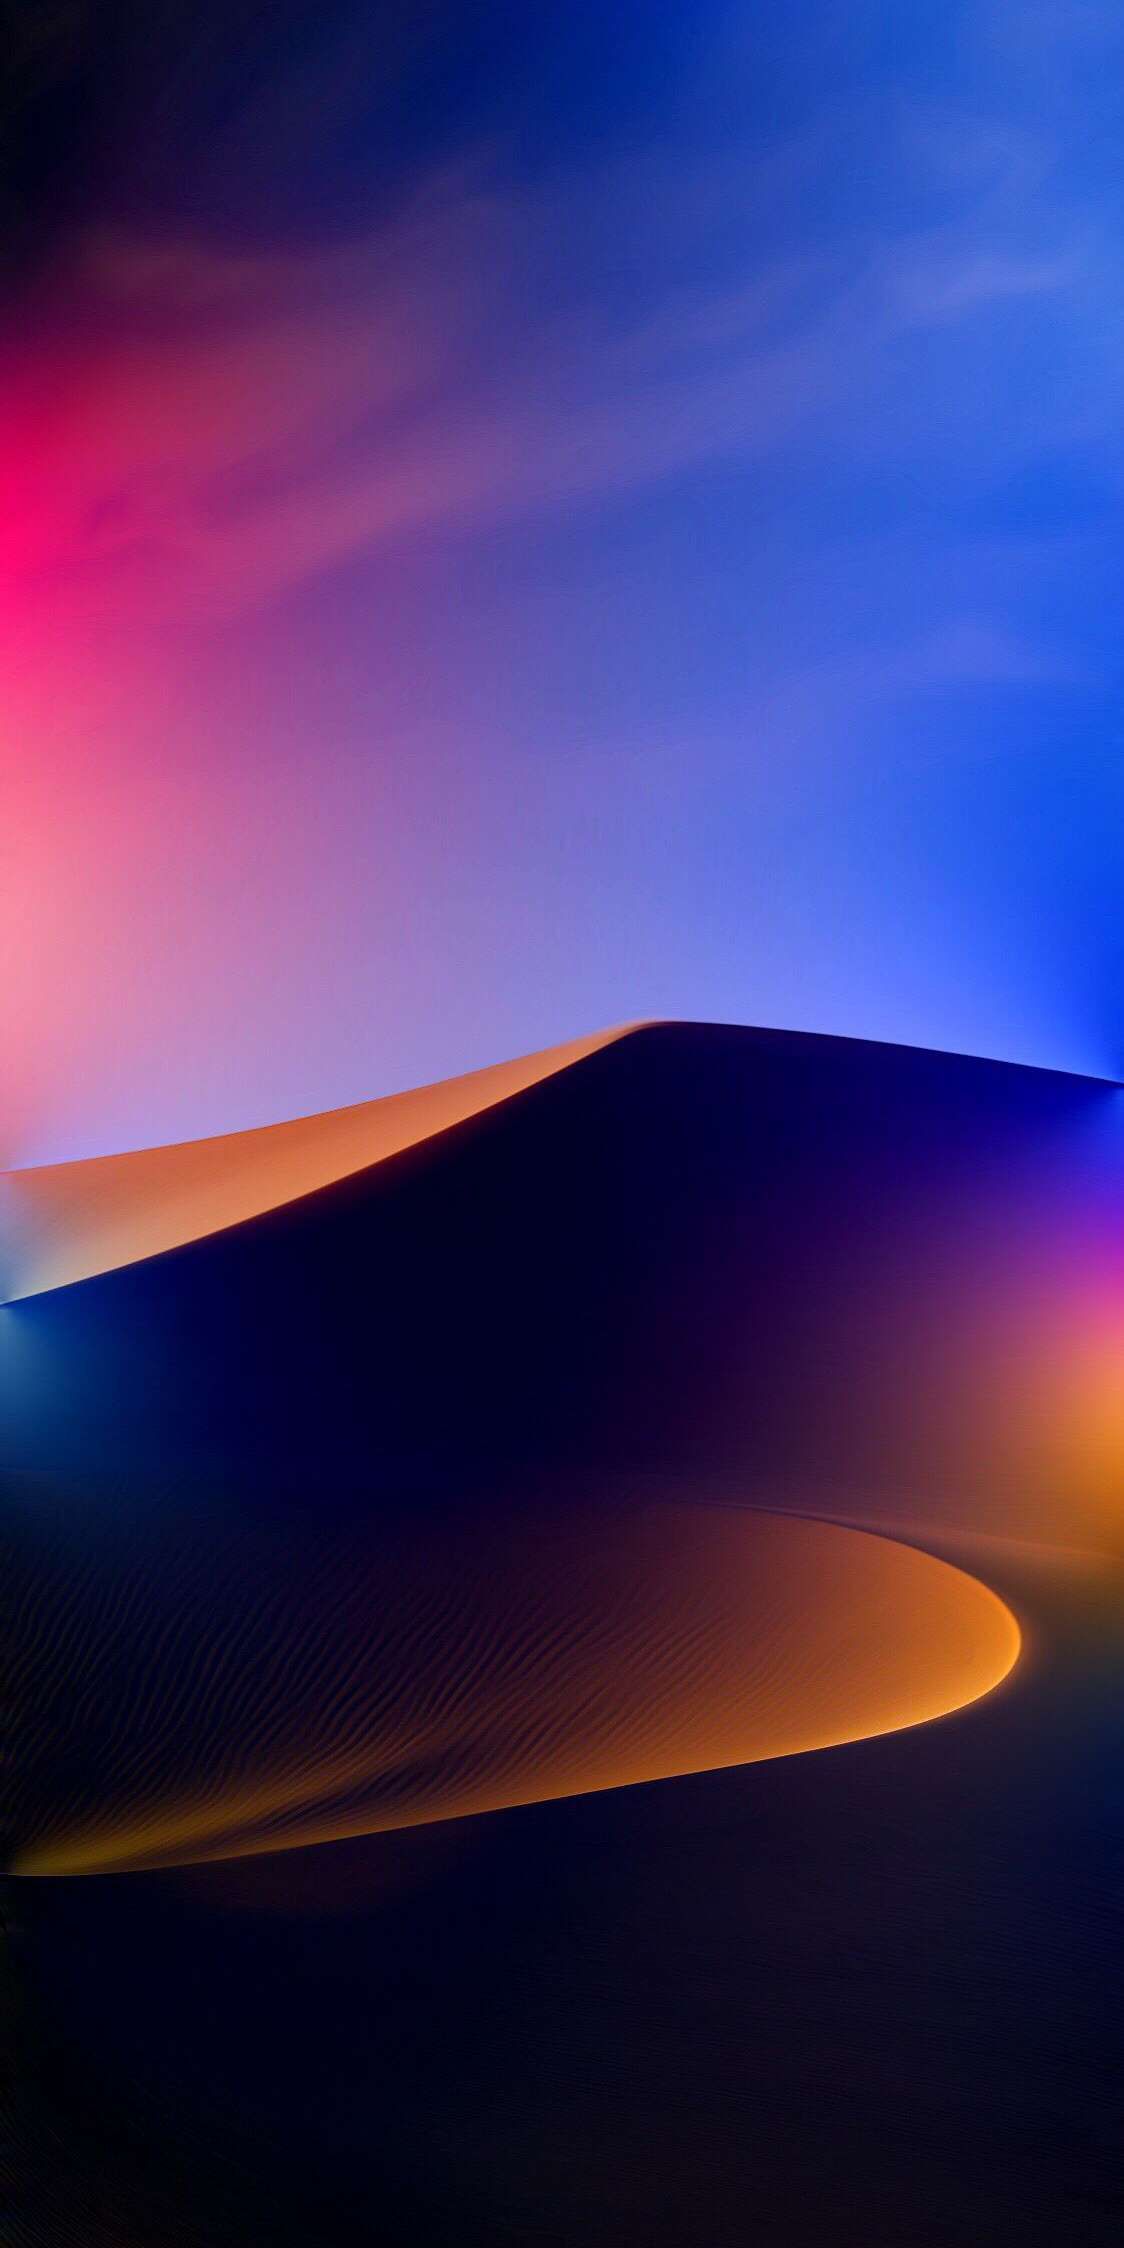 Backgrounds For Oneplus 5t - 1124x2248 Wallpaper 